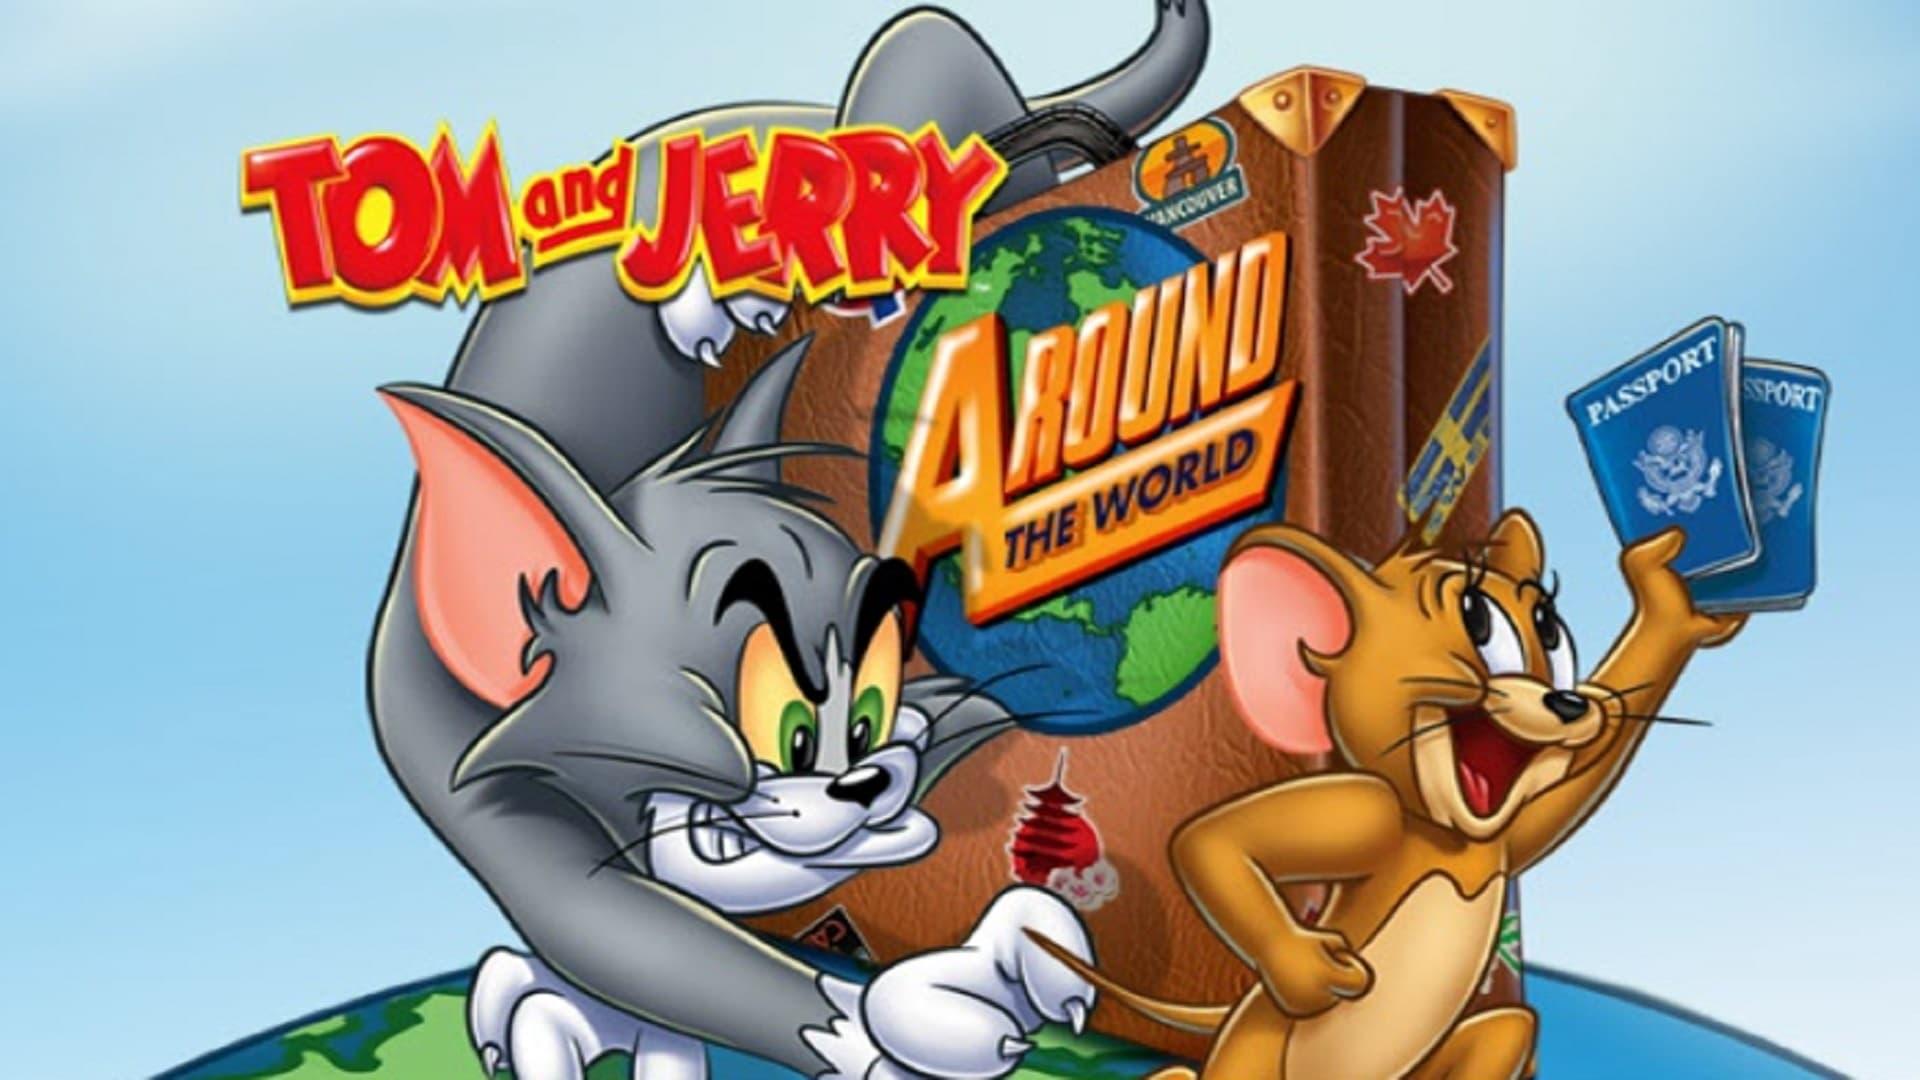 Tom and Jerry: Around The World backdrop